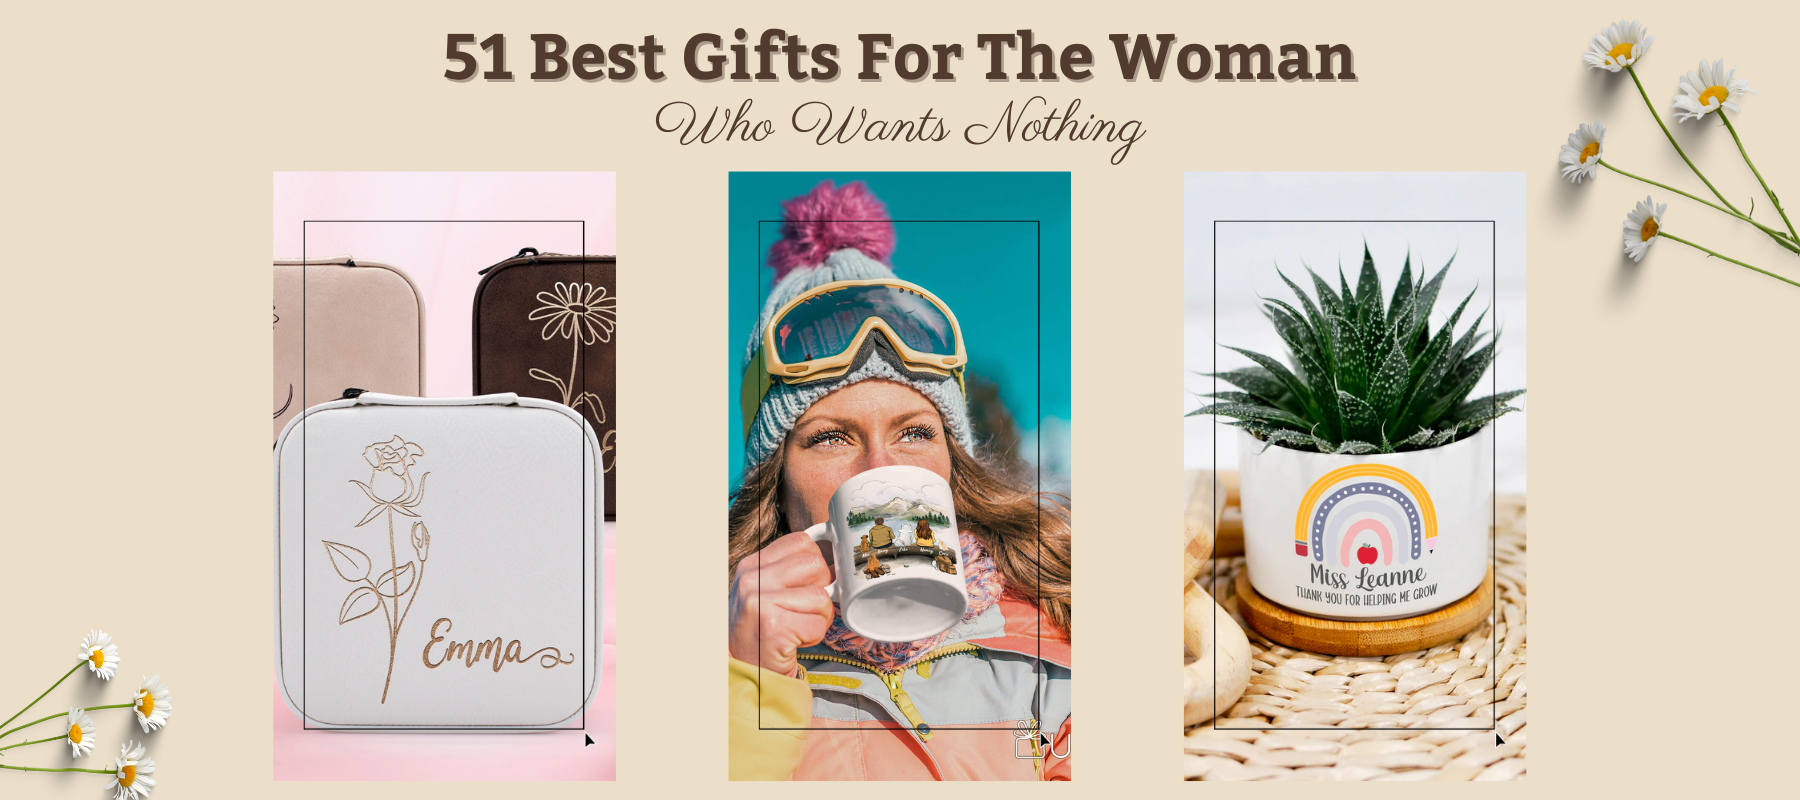 10 BEST Unique & Useful Gifts For The Woman Who Wants Nothing